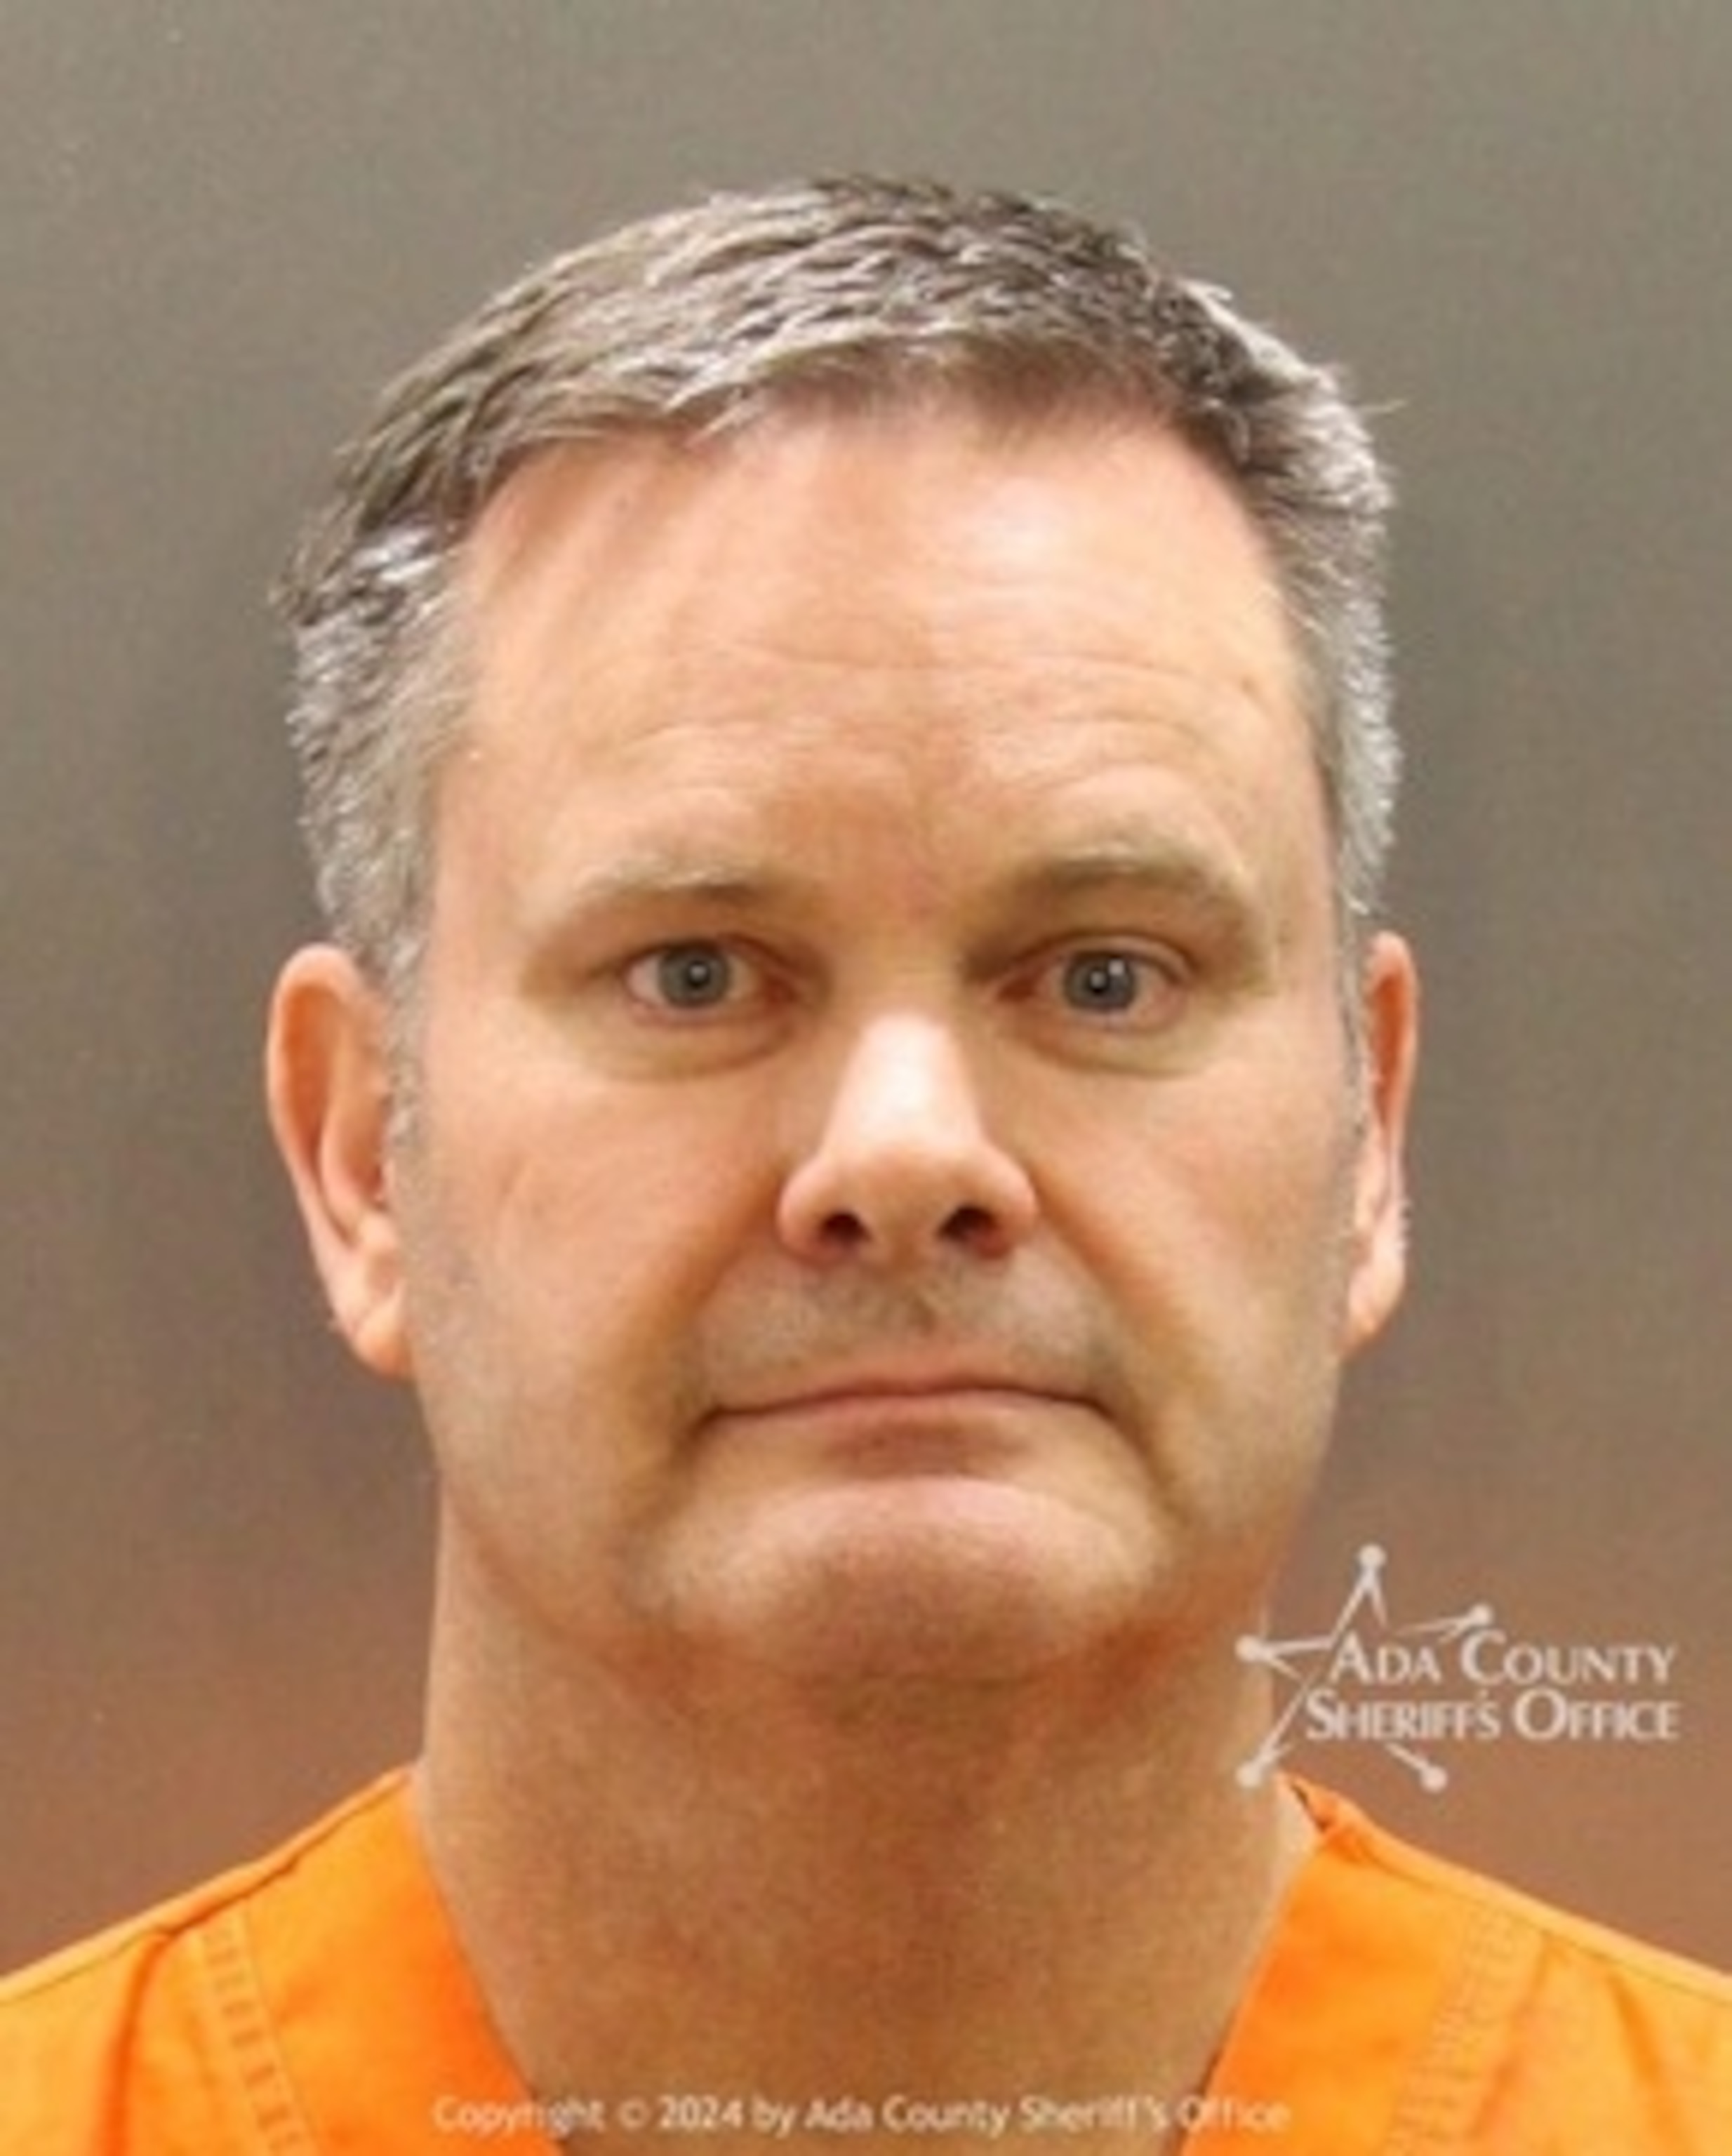 PHOTO: In this booking photo released by the Ada County Sheriff's Office, Chad Daybell is shown.